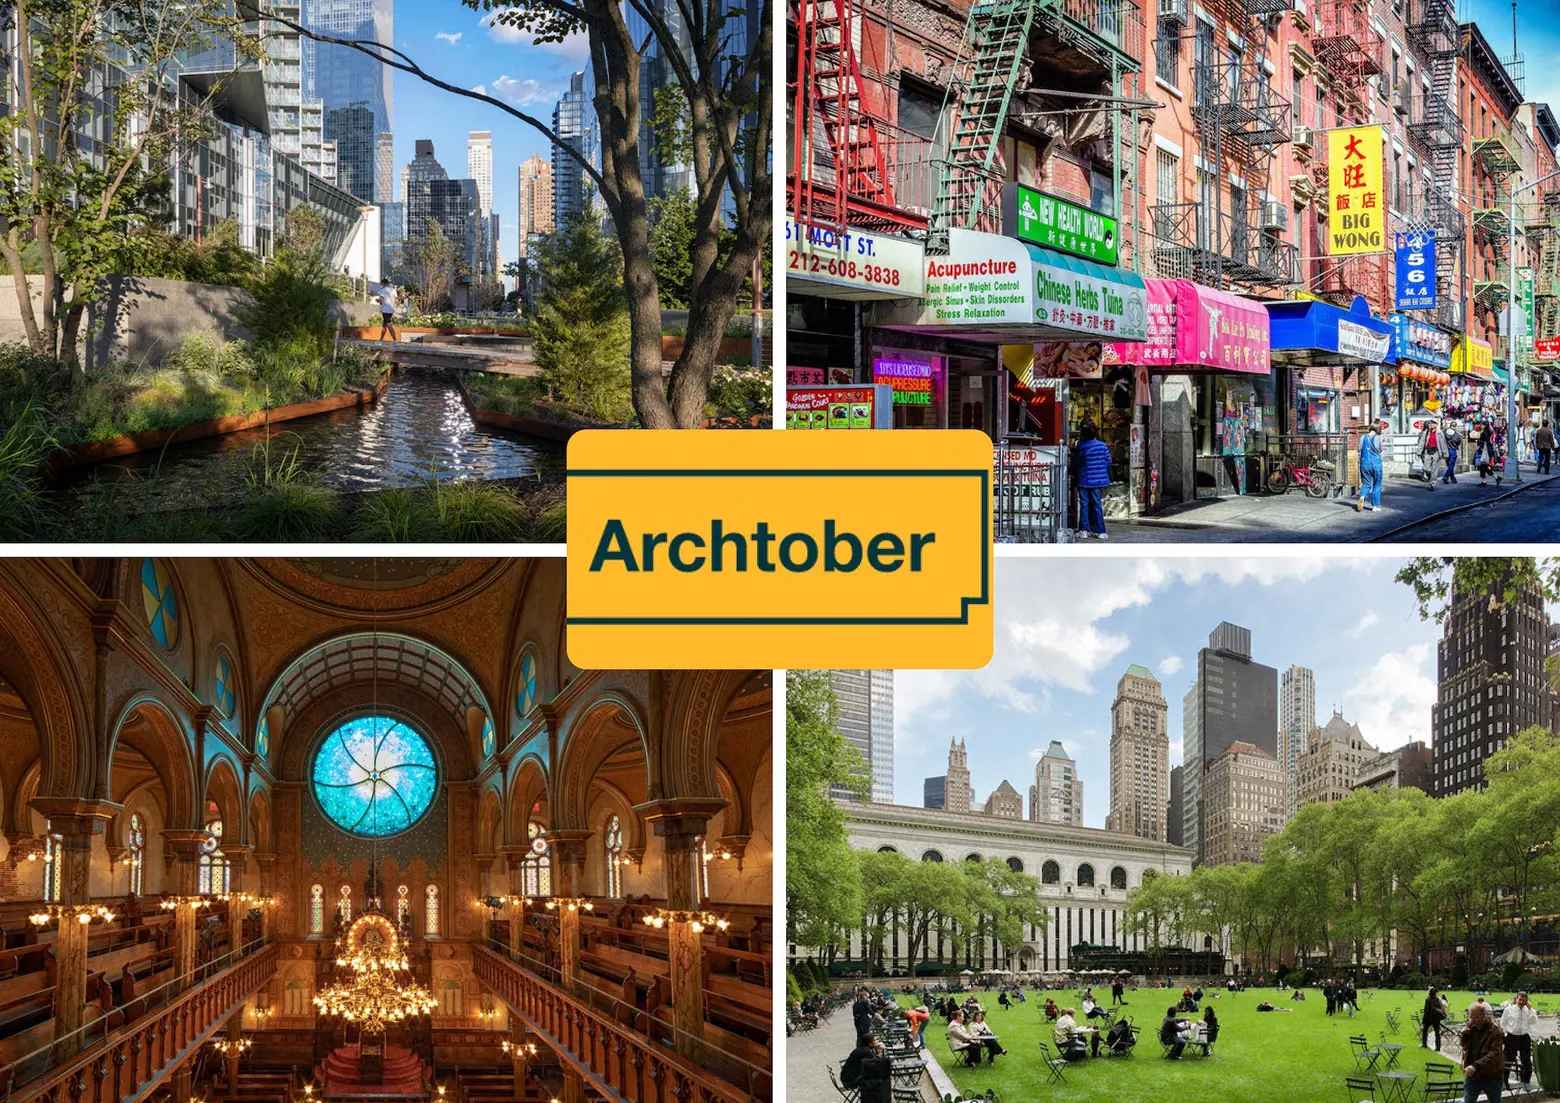 Archtober 2022: This year’s top architecture and design events